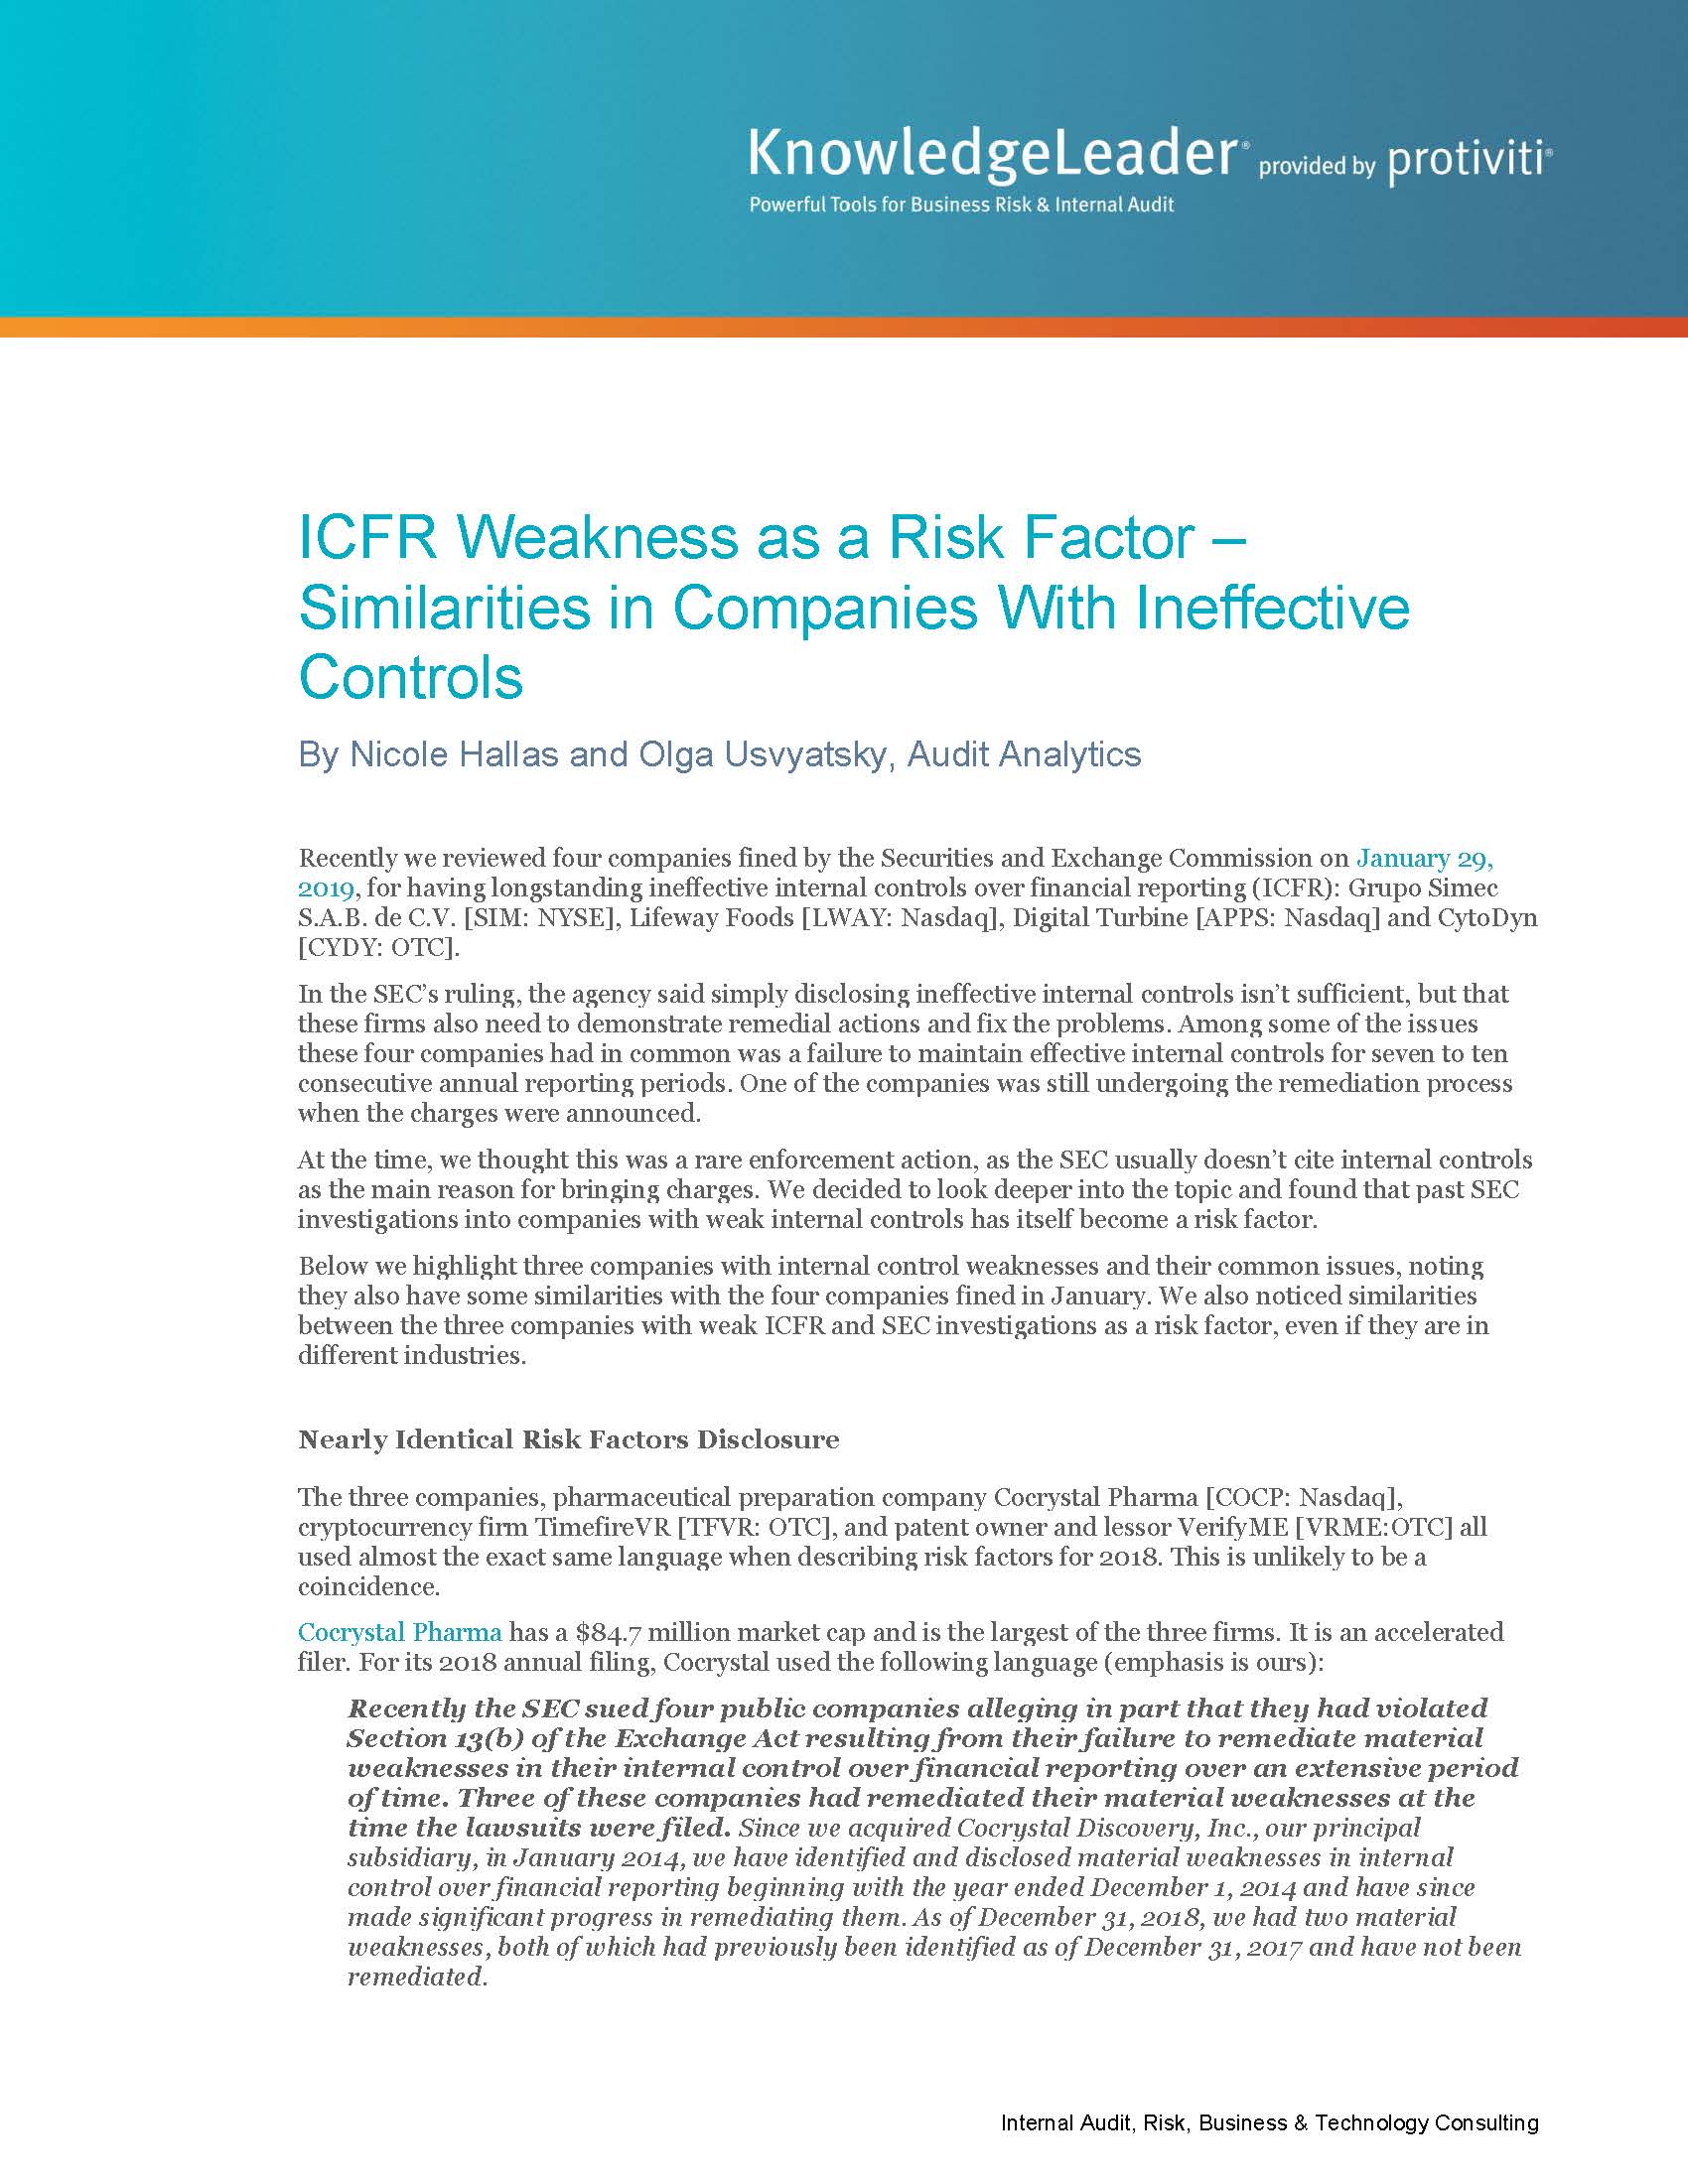 Screenshot of the first page of ICFR Weakness as a Risk Factor – Similarities in Companies with Ineffective Controls